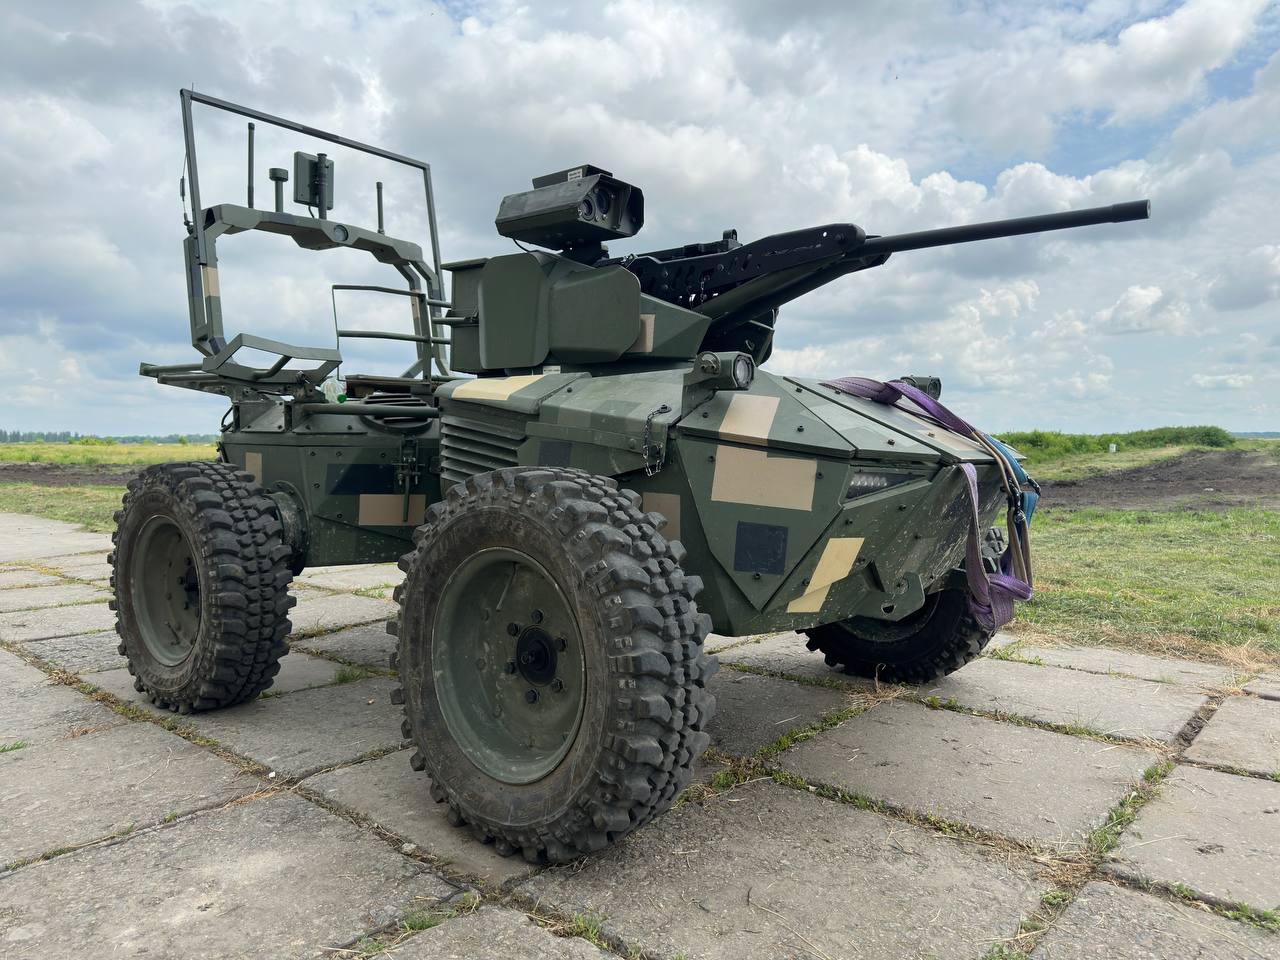 Ironclad UGV with Shablia M2, equipped with a 12.7mm machine gun